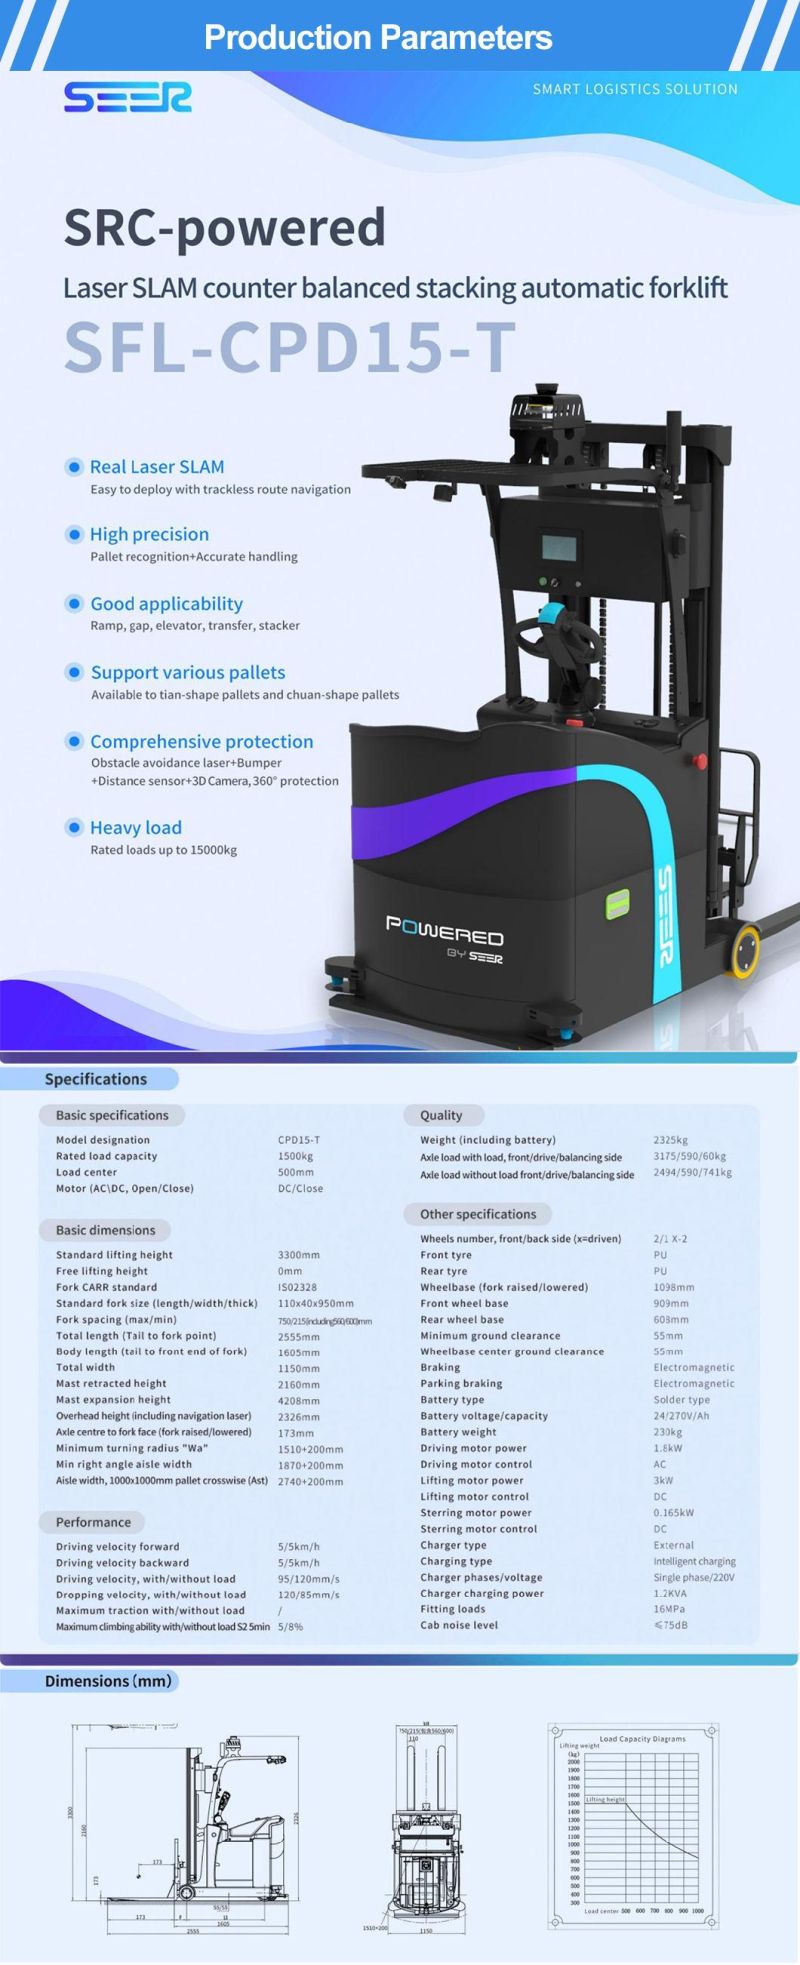 Hot Selling Automatic Src-Powered Laser Slam Small Stacker Forklift Sfl-Cdd14 with Good Production Line